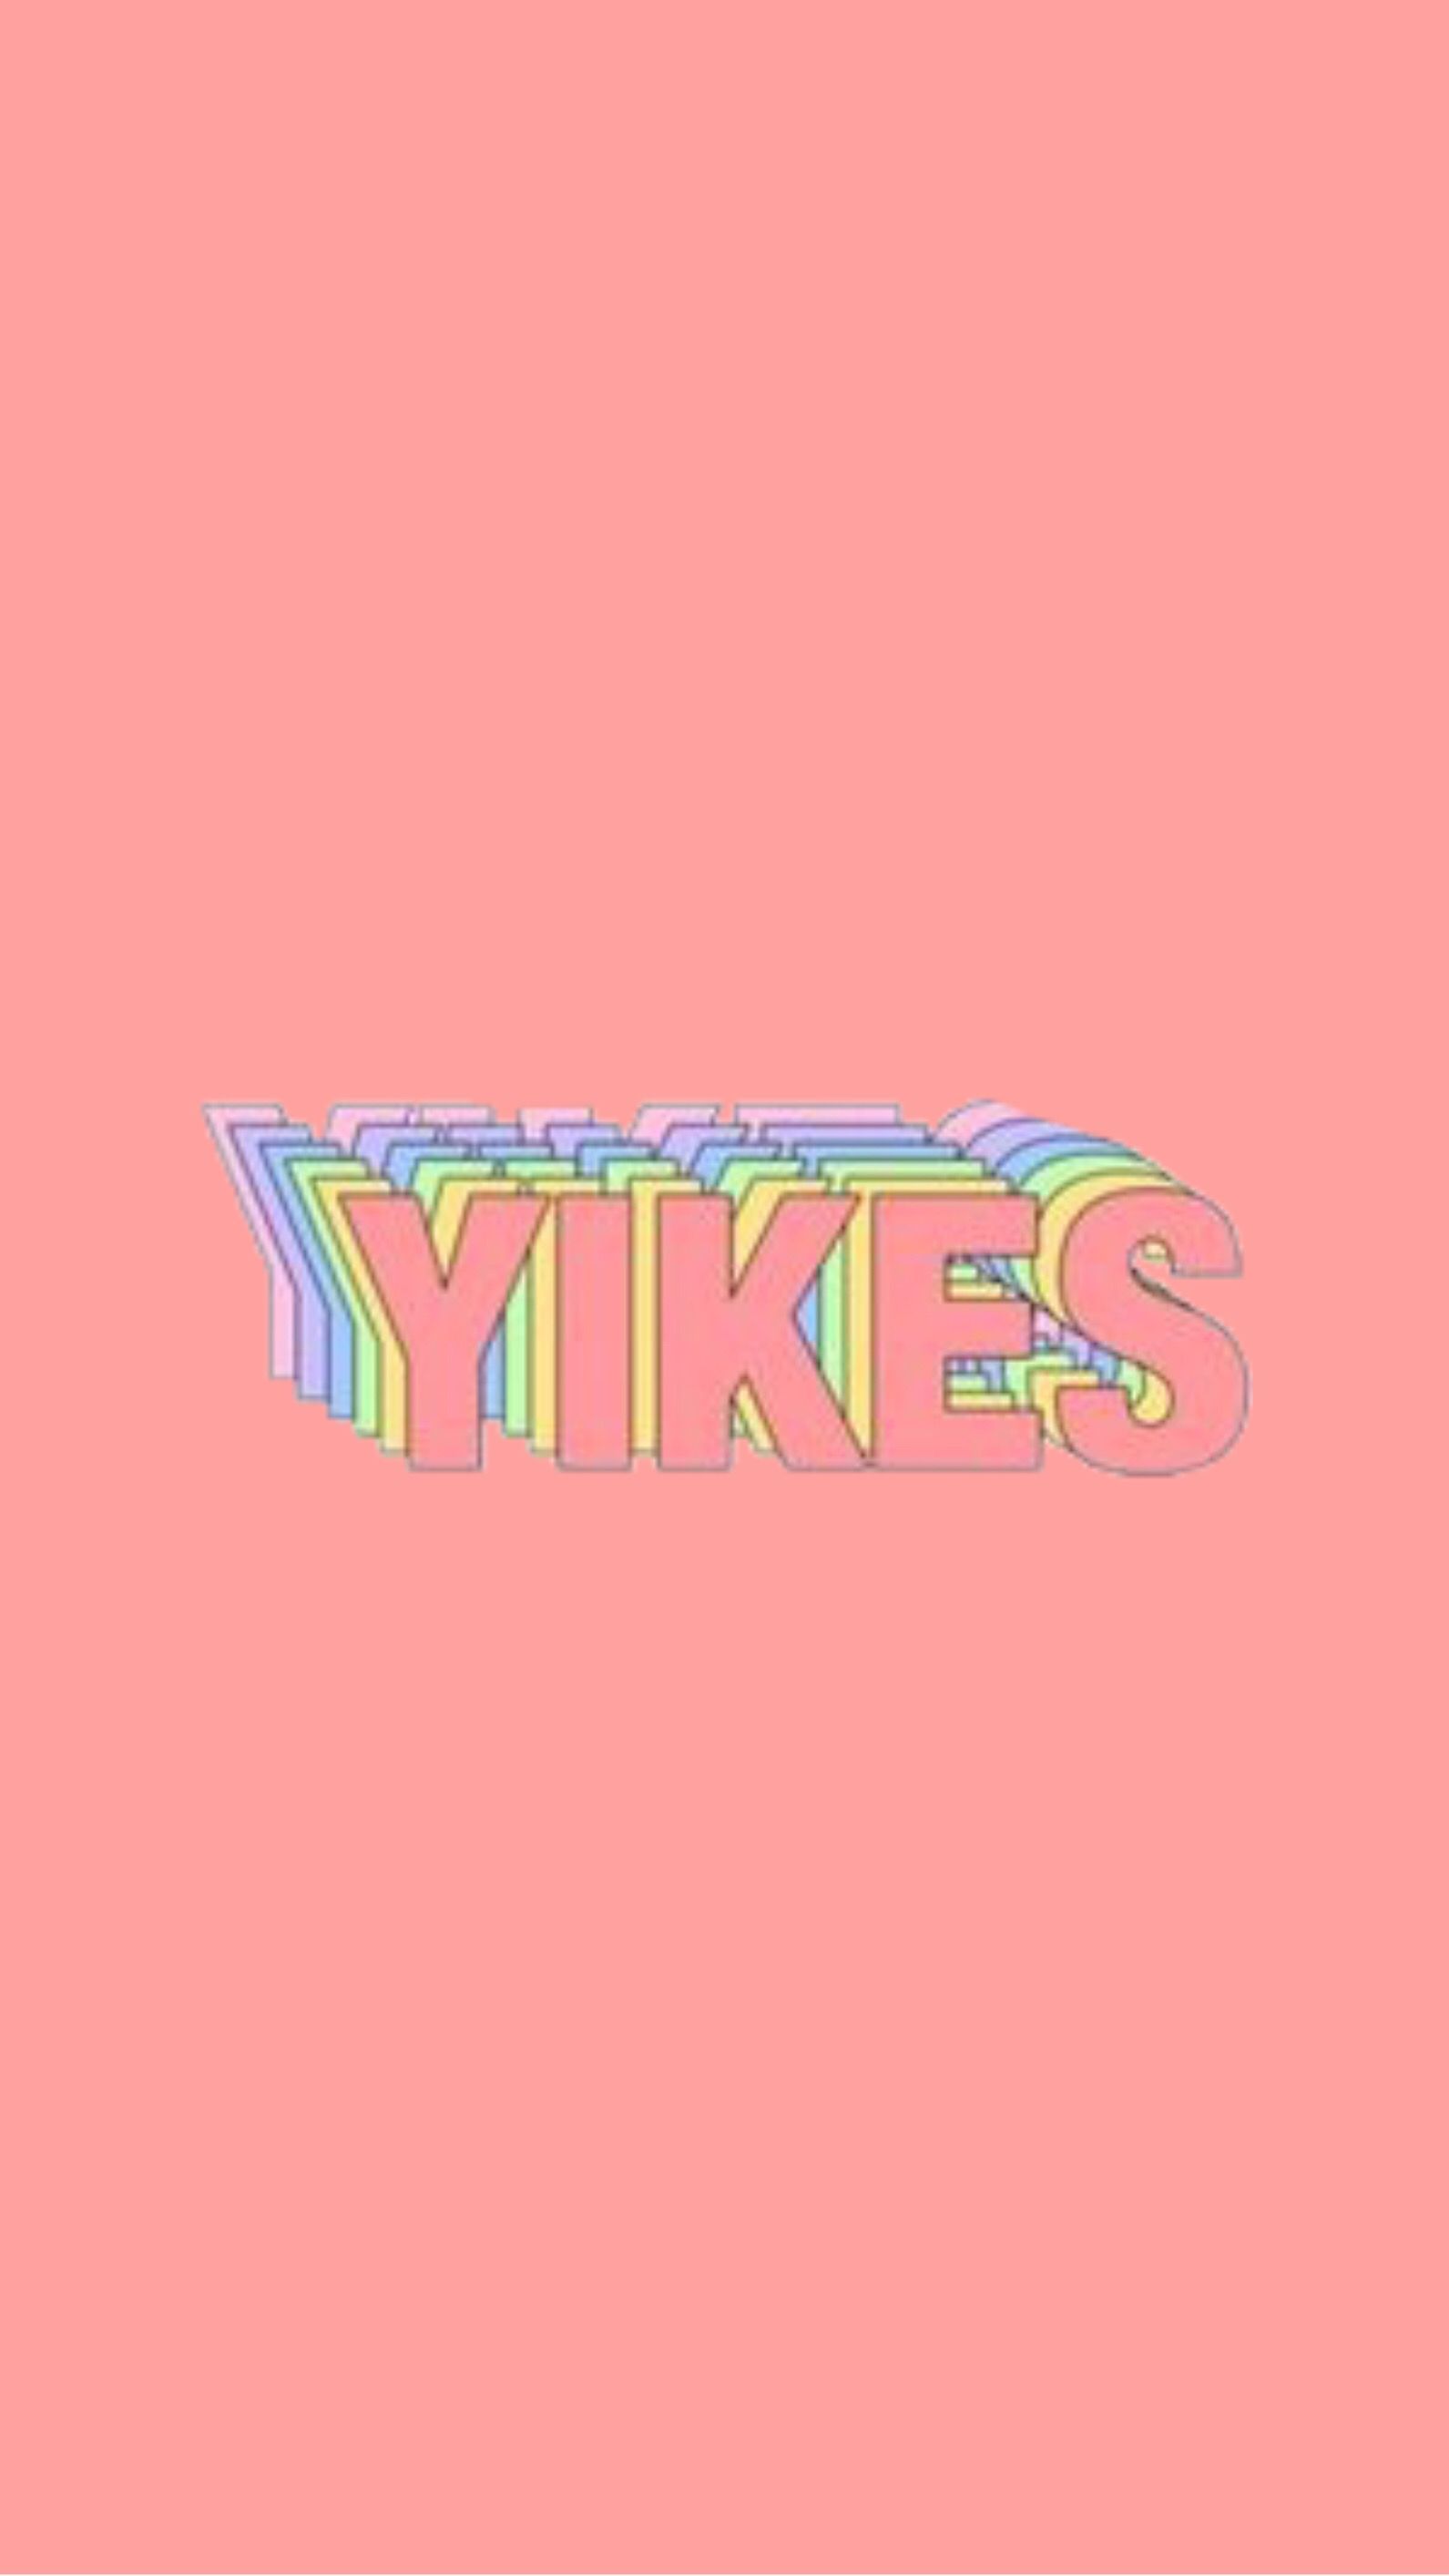 Yikes.by stephh. Background phone wallpaper, iPhone background wallpaper, Wallpaper